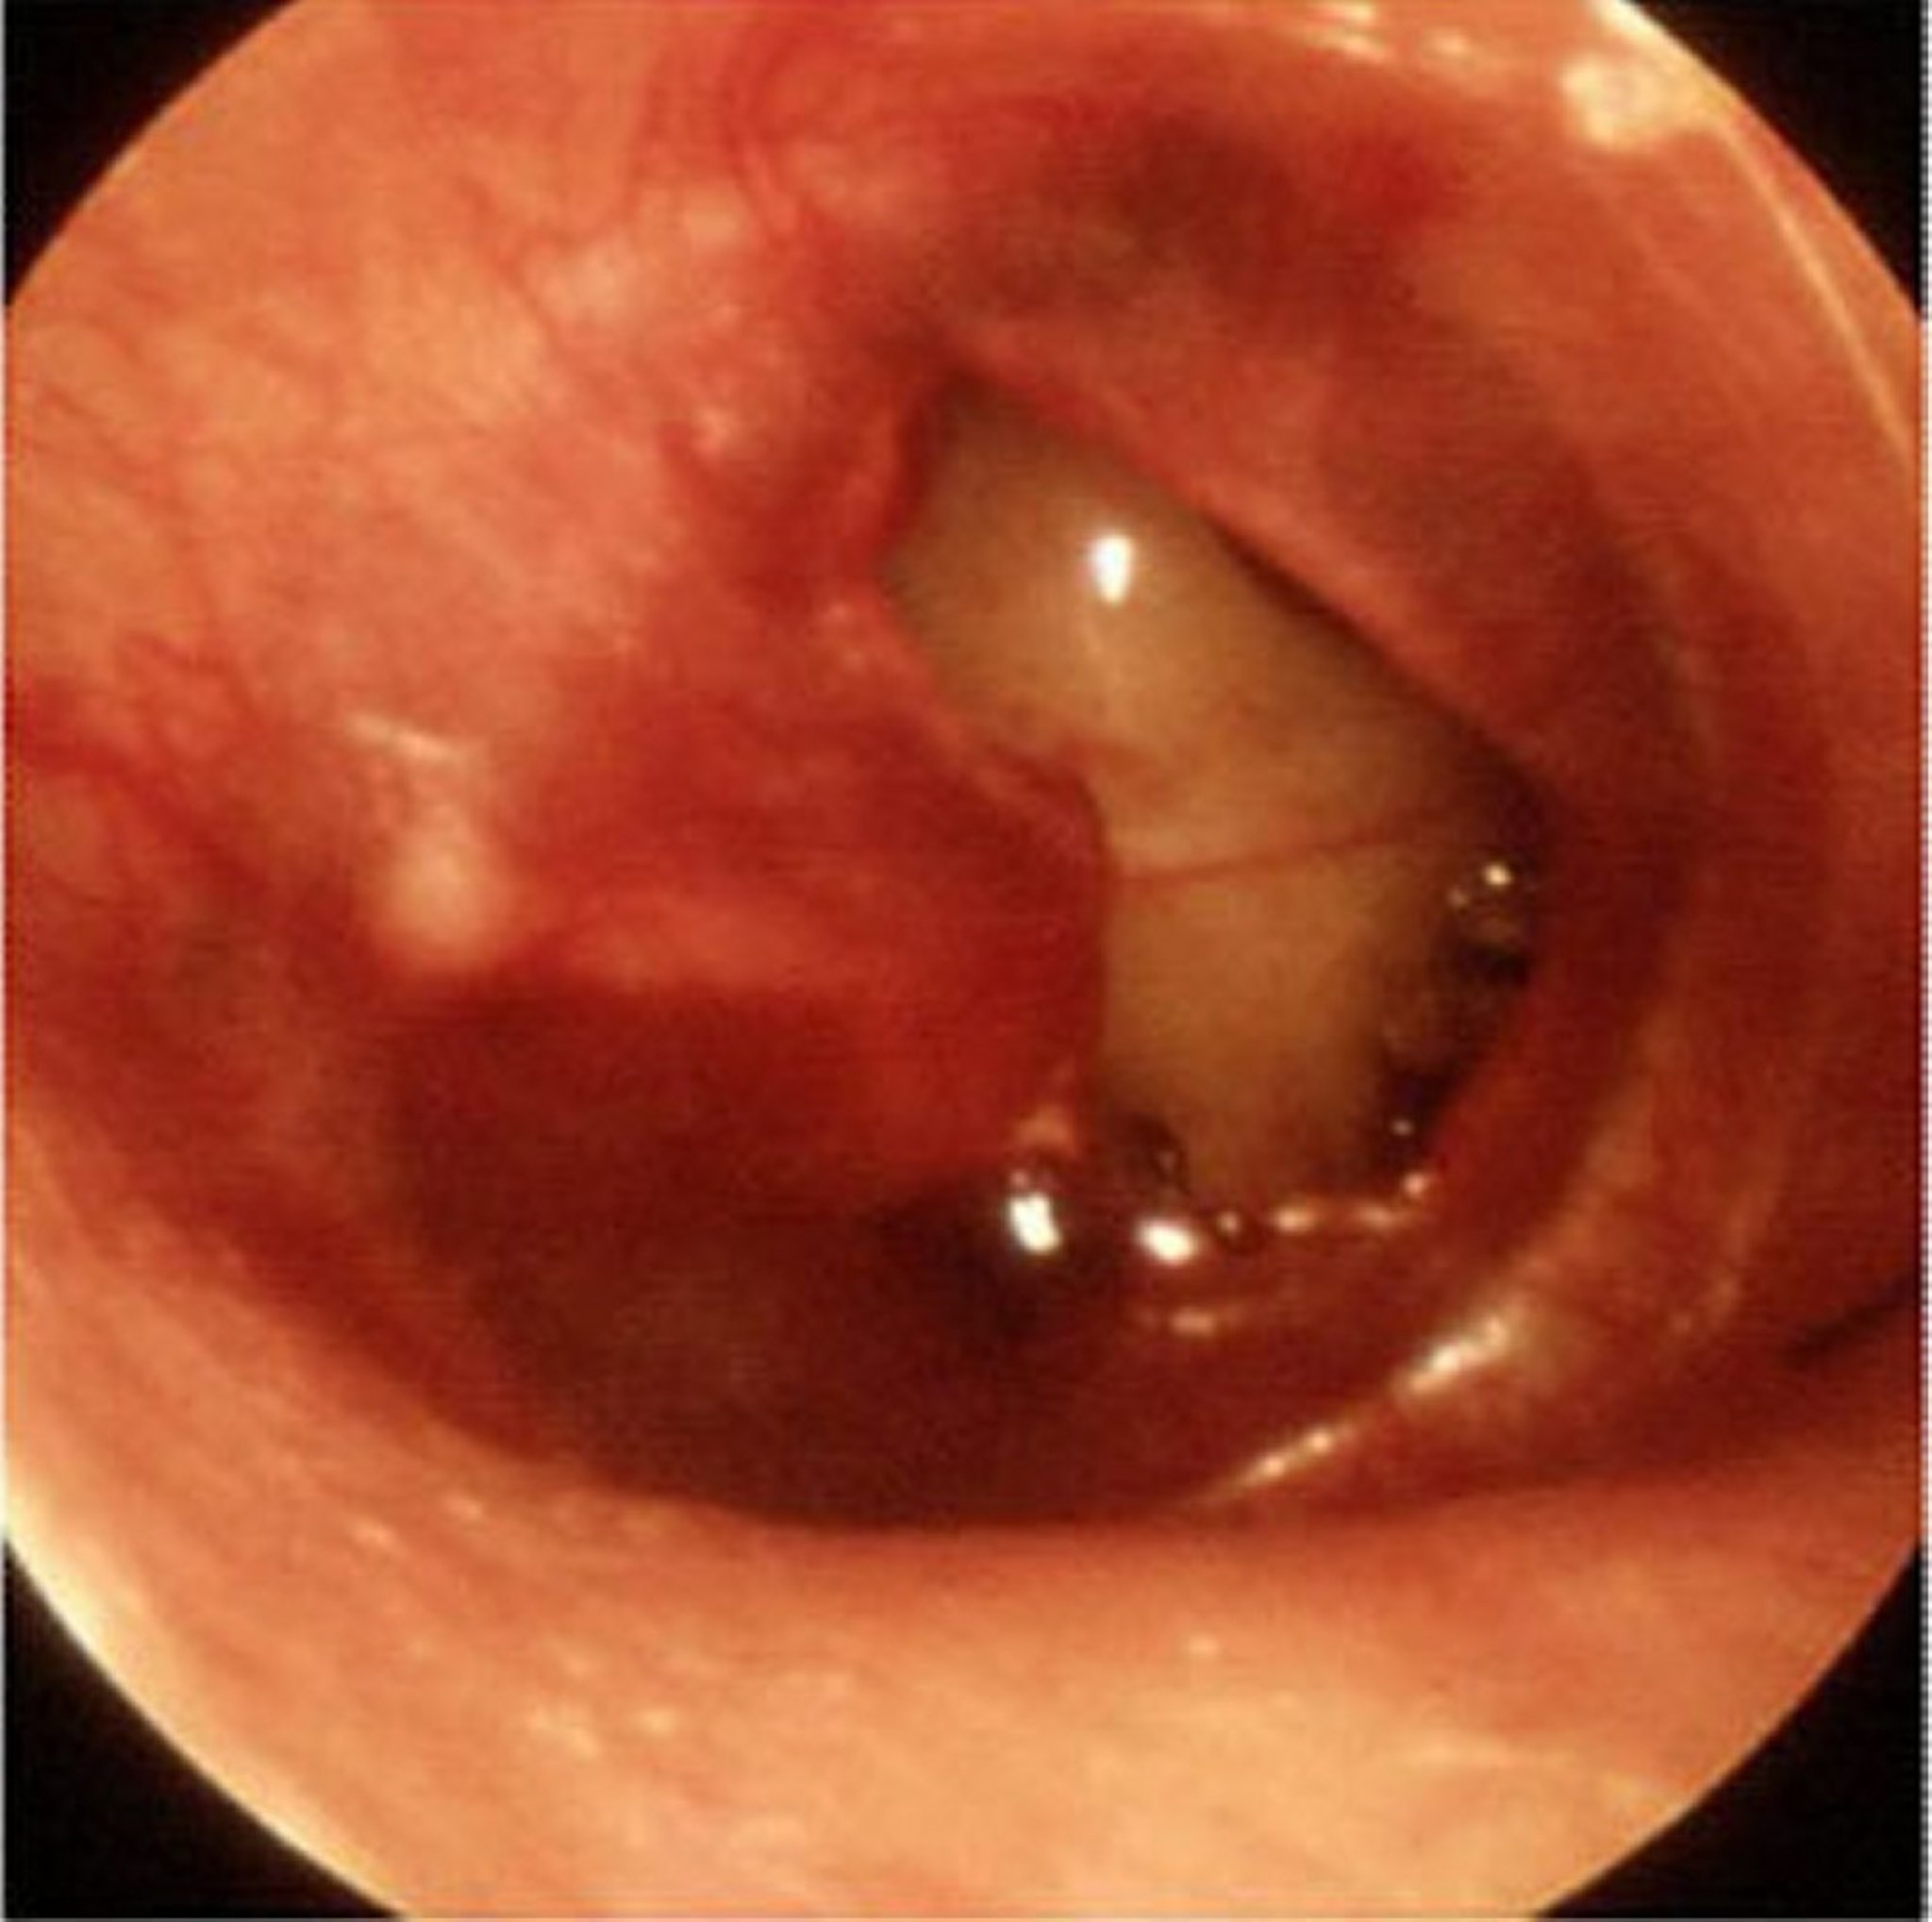 Perforation of the Eardrum